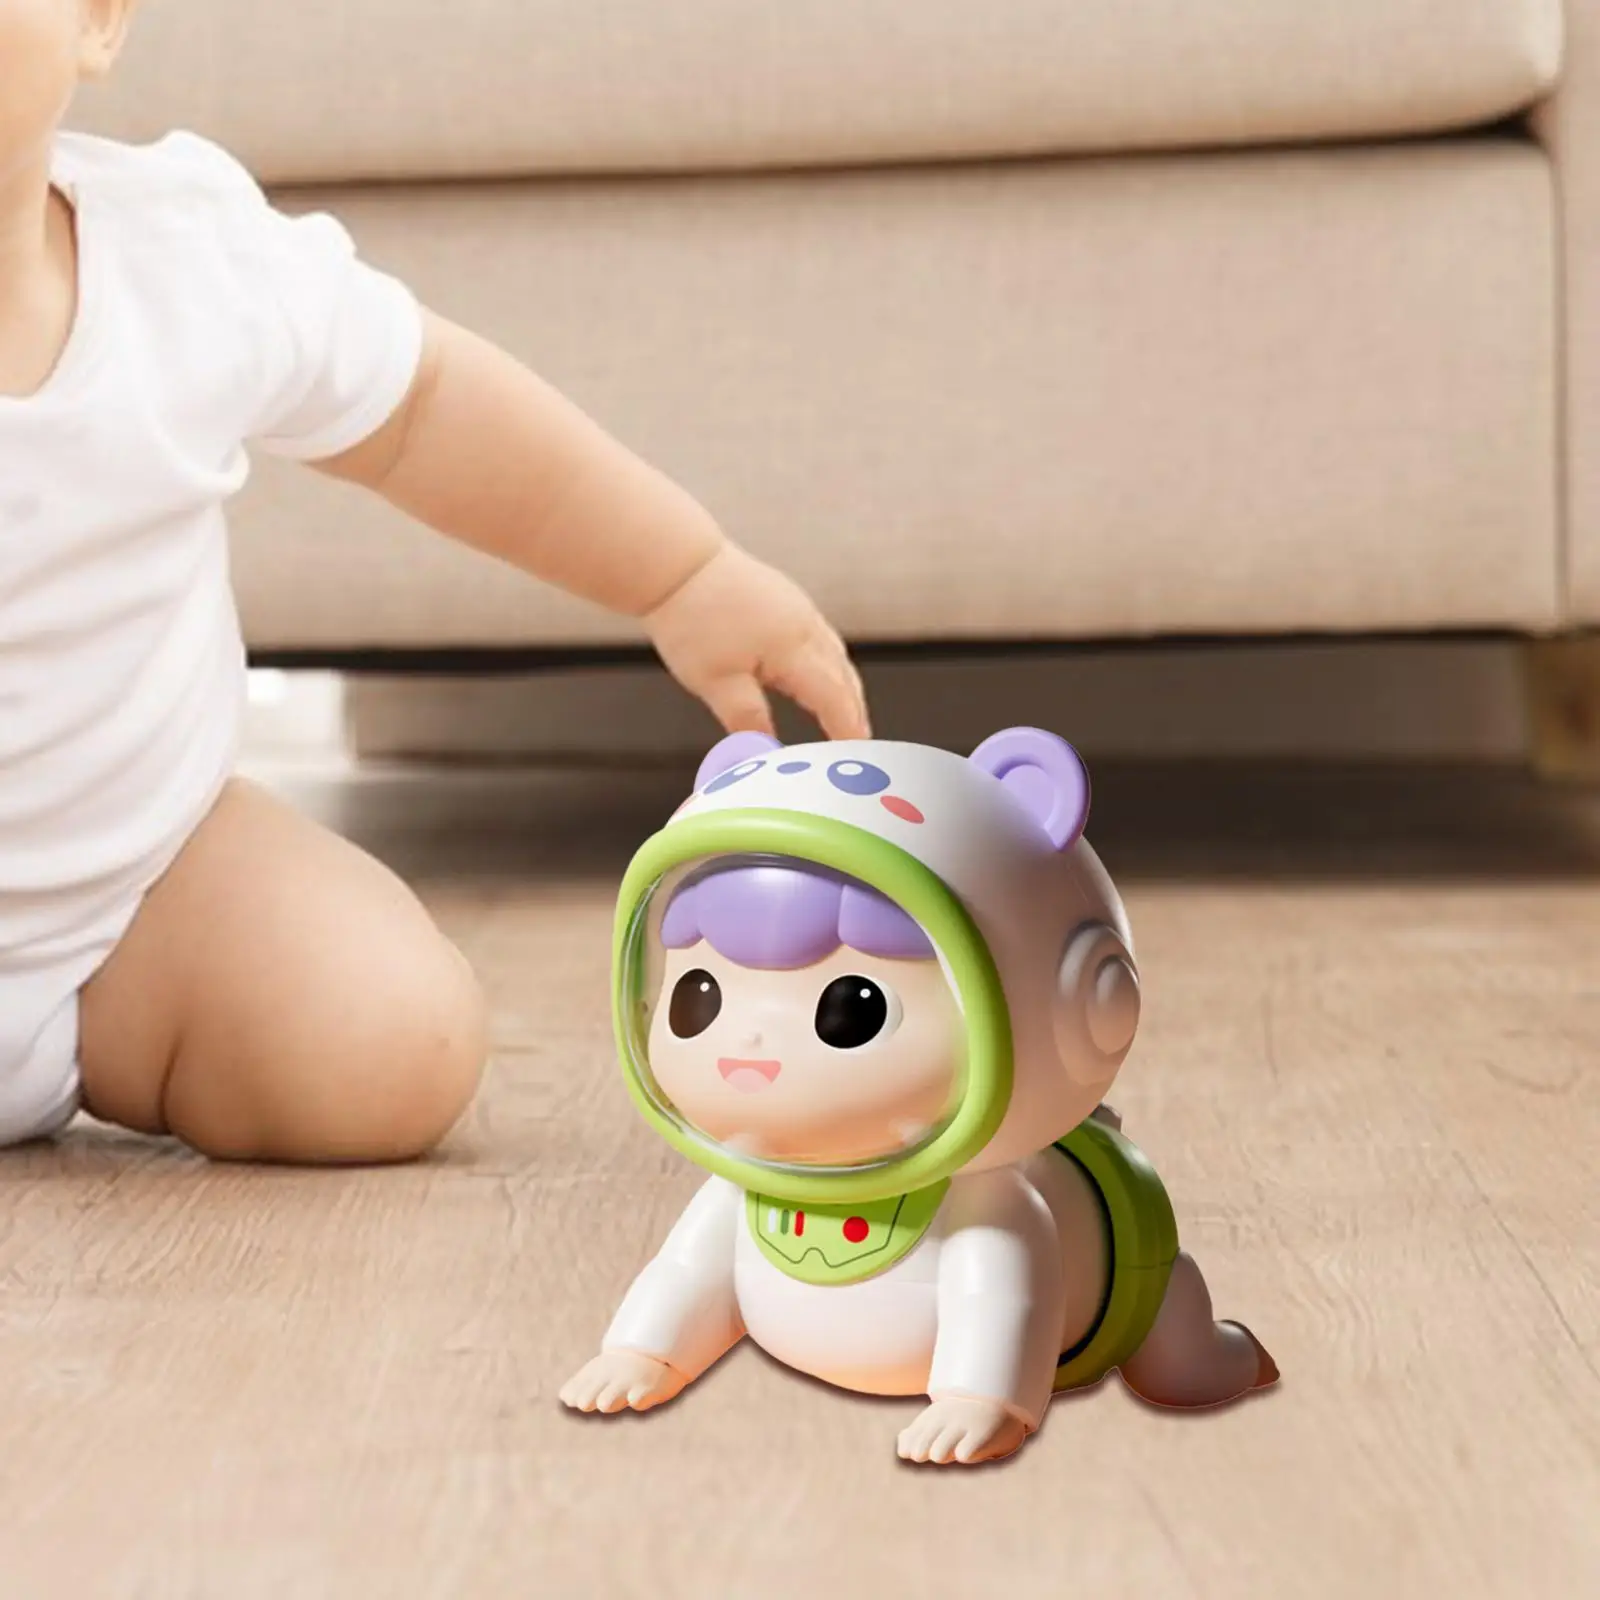 

Crawling Baby Doll Development Interactive Gift Electric Baby Crawling Doll for Toddlers Girls Infants Children 6-12 Months